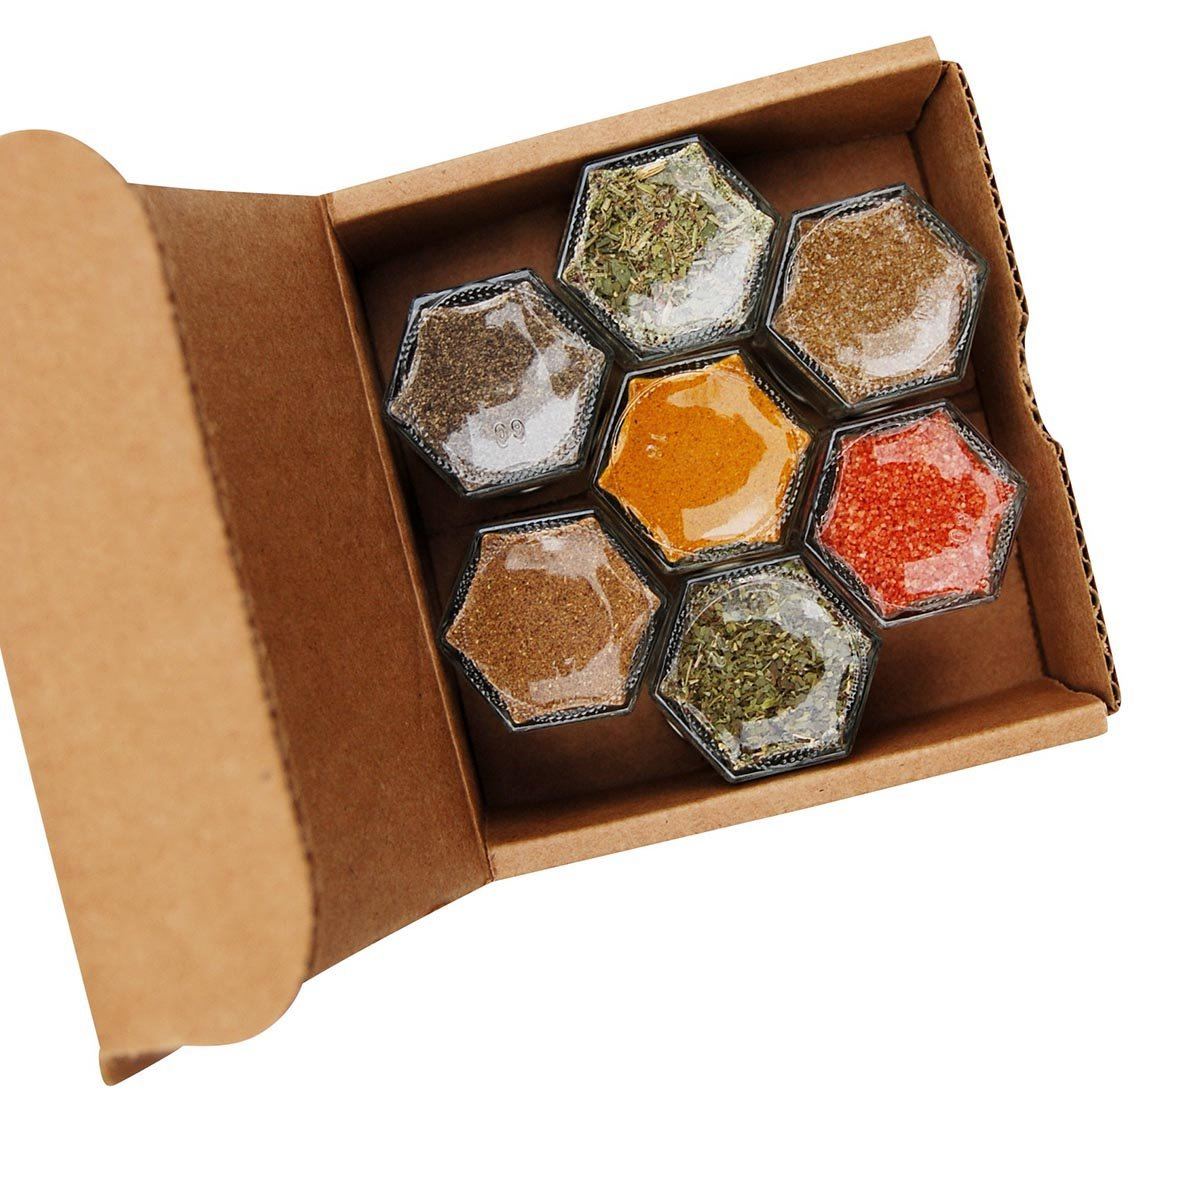 Herbivore Spice Gift Set | Spice Collection for Vegetarians and Vegans